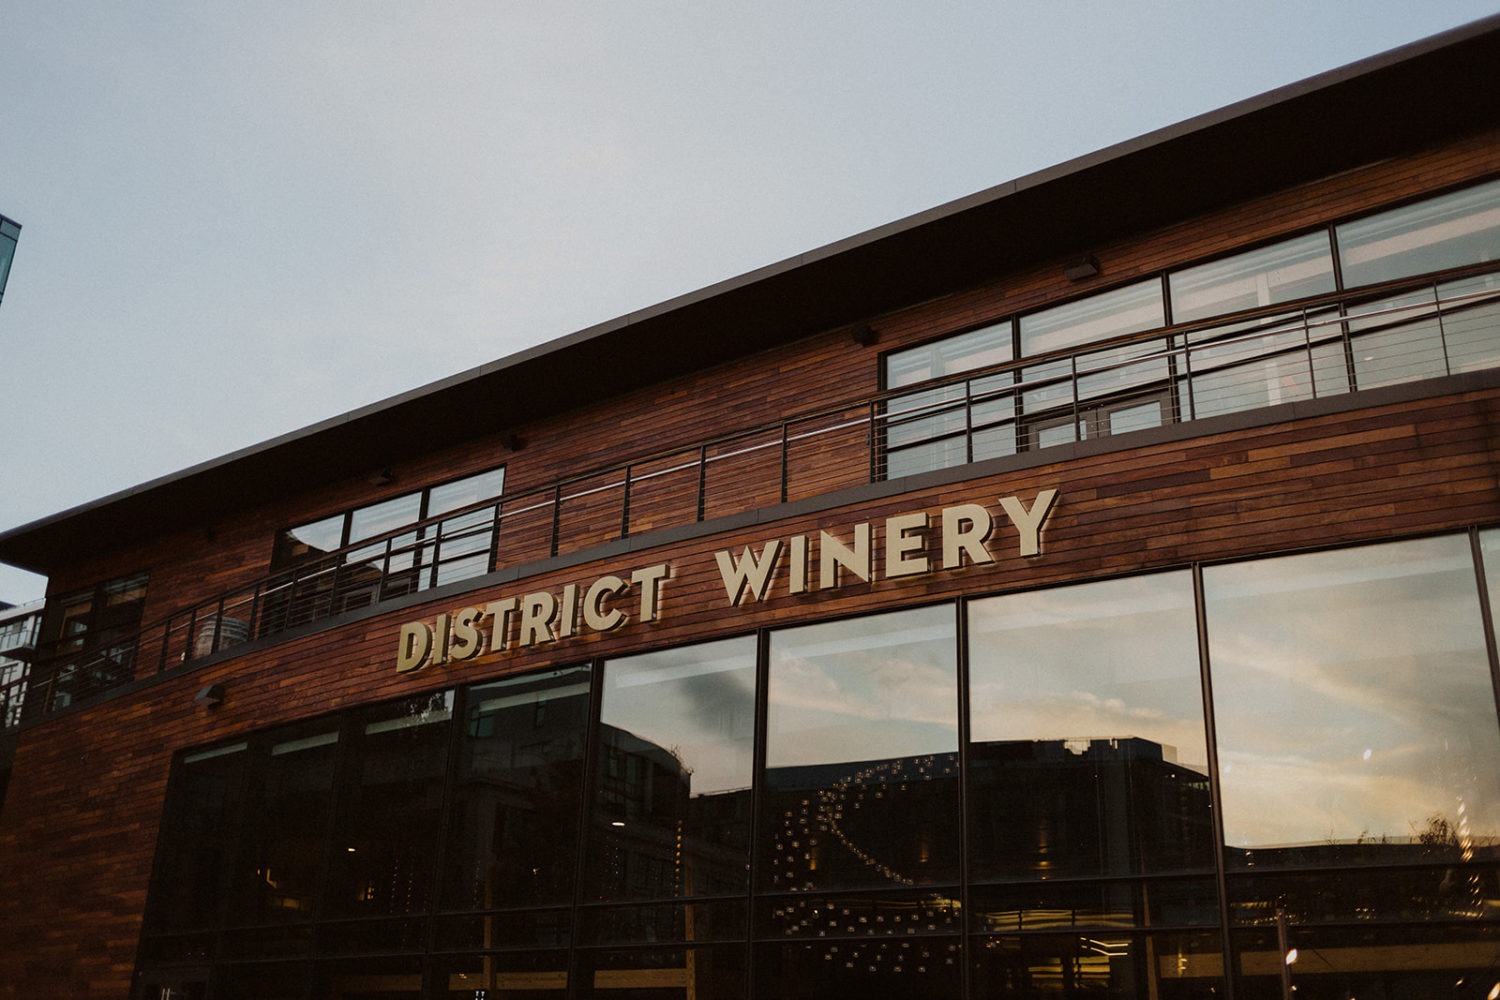 Front sign of District Winery one of the best wedding venues in dc